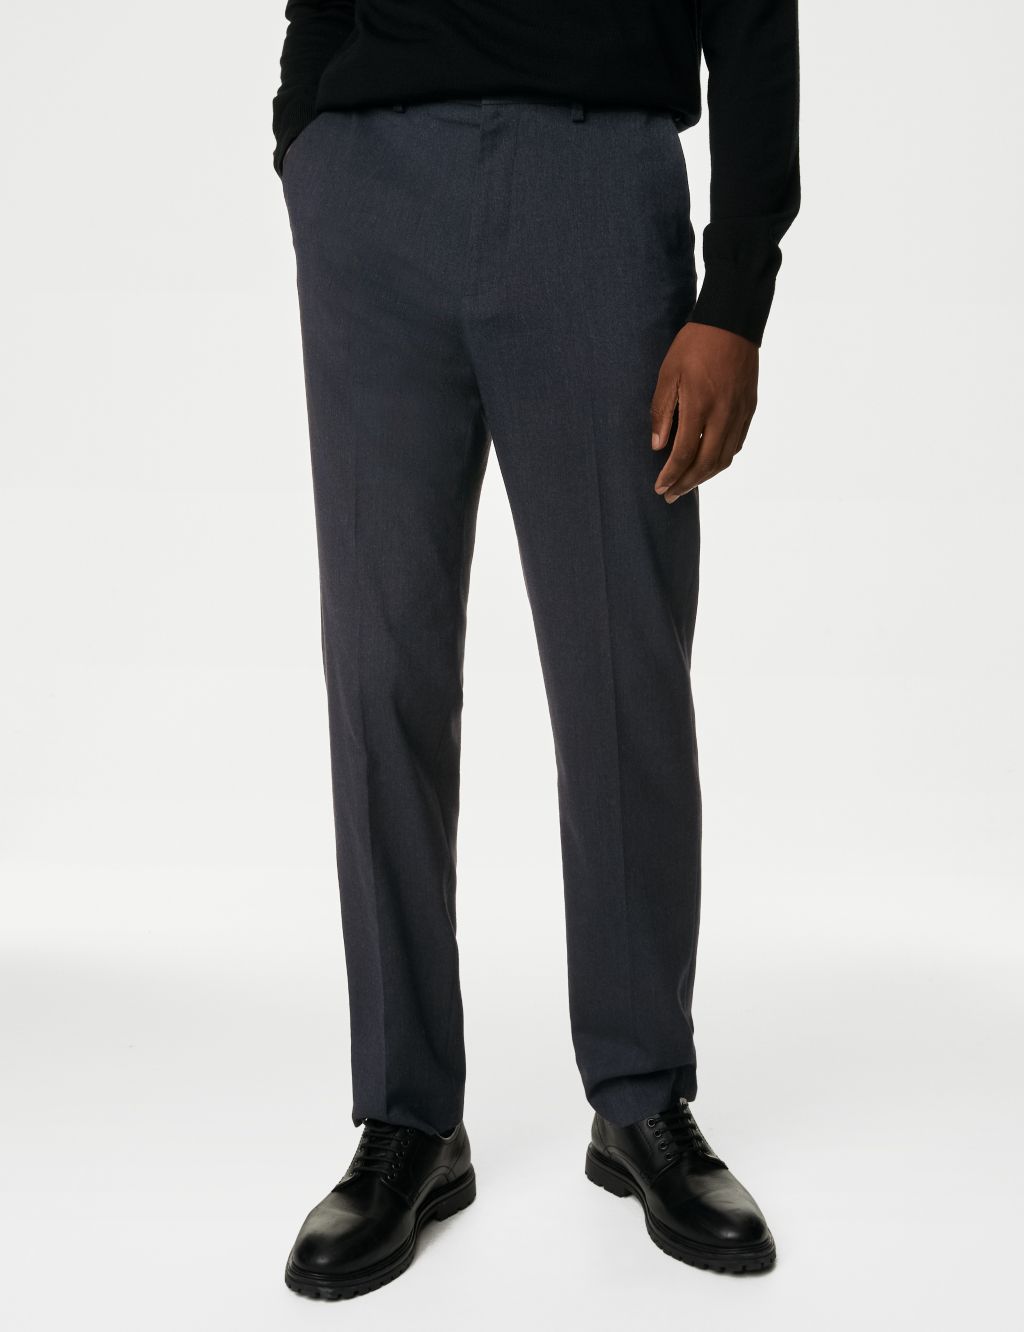 Regular Fit Stretch Trousers image 4